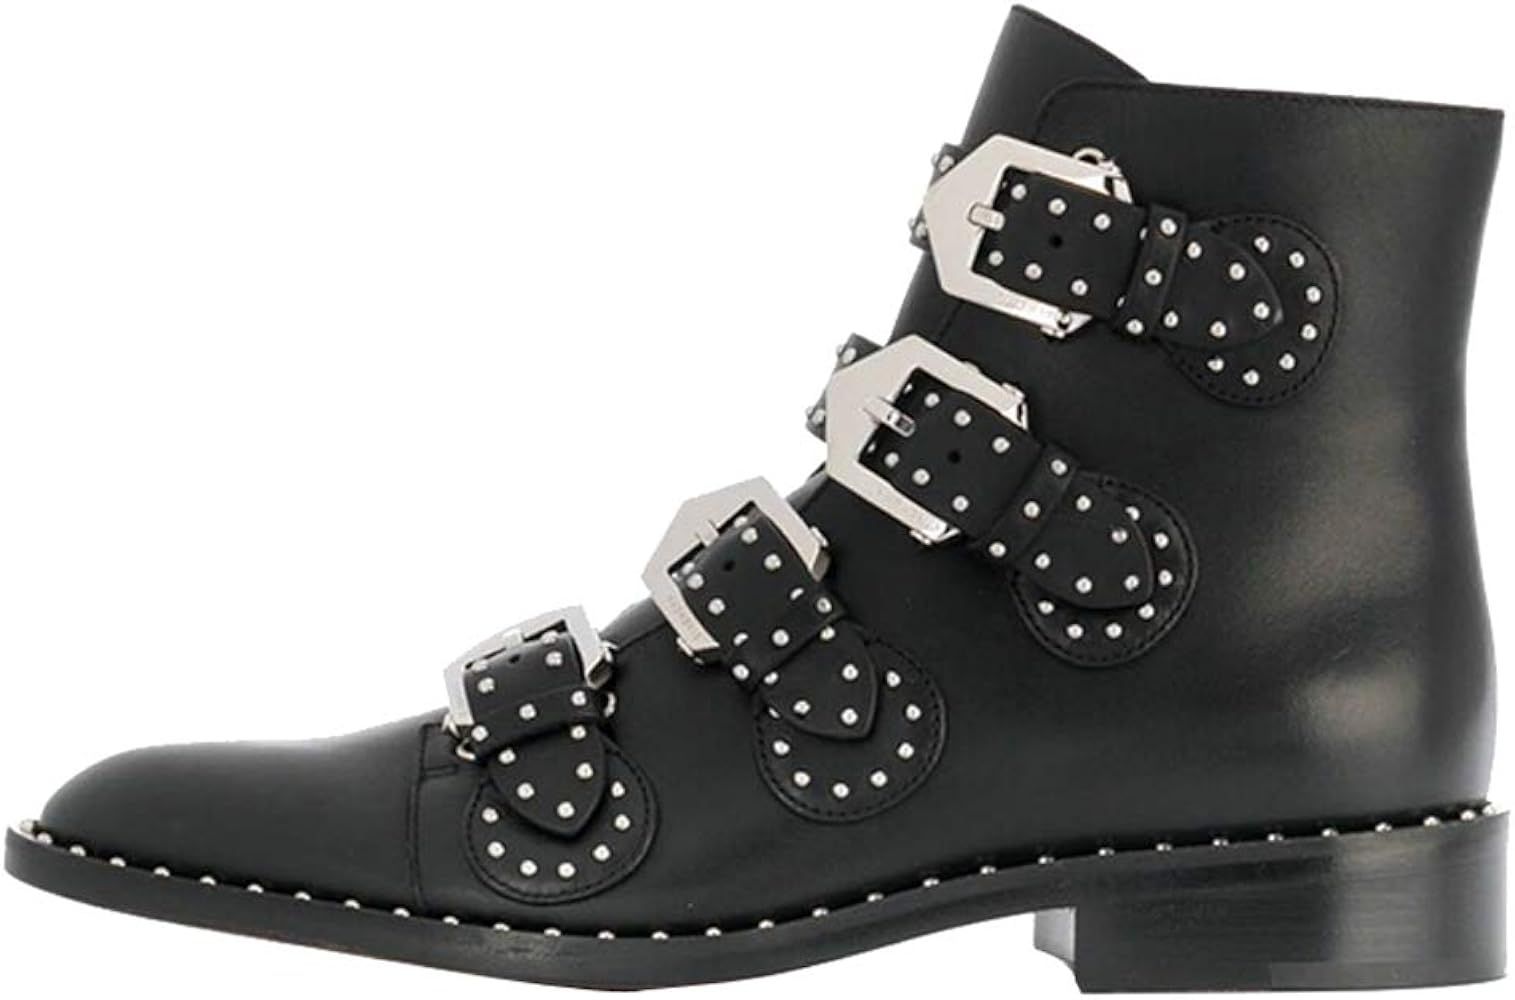 The Most Women's Leather Boot Rivet Low Heels Ankle Studded Booties | Amazon (US)